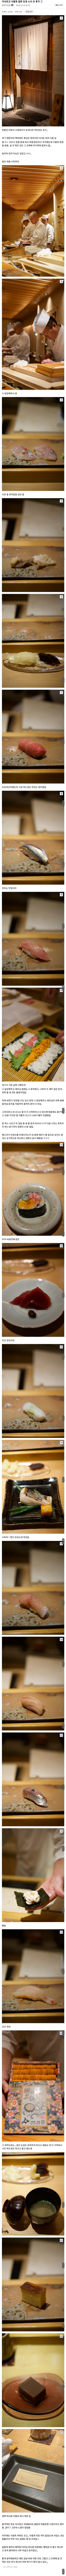 A di-citizen who ate omakase and got food poisoning in Tokyo.jpg